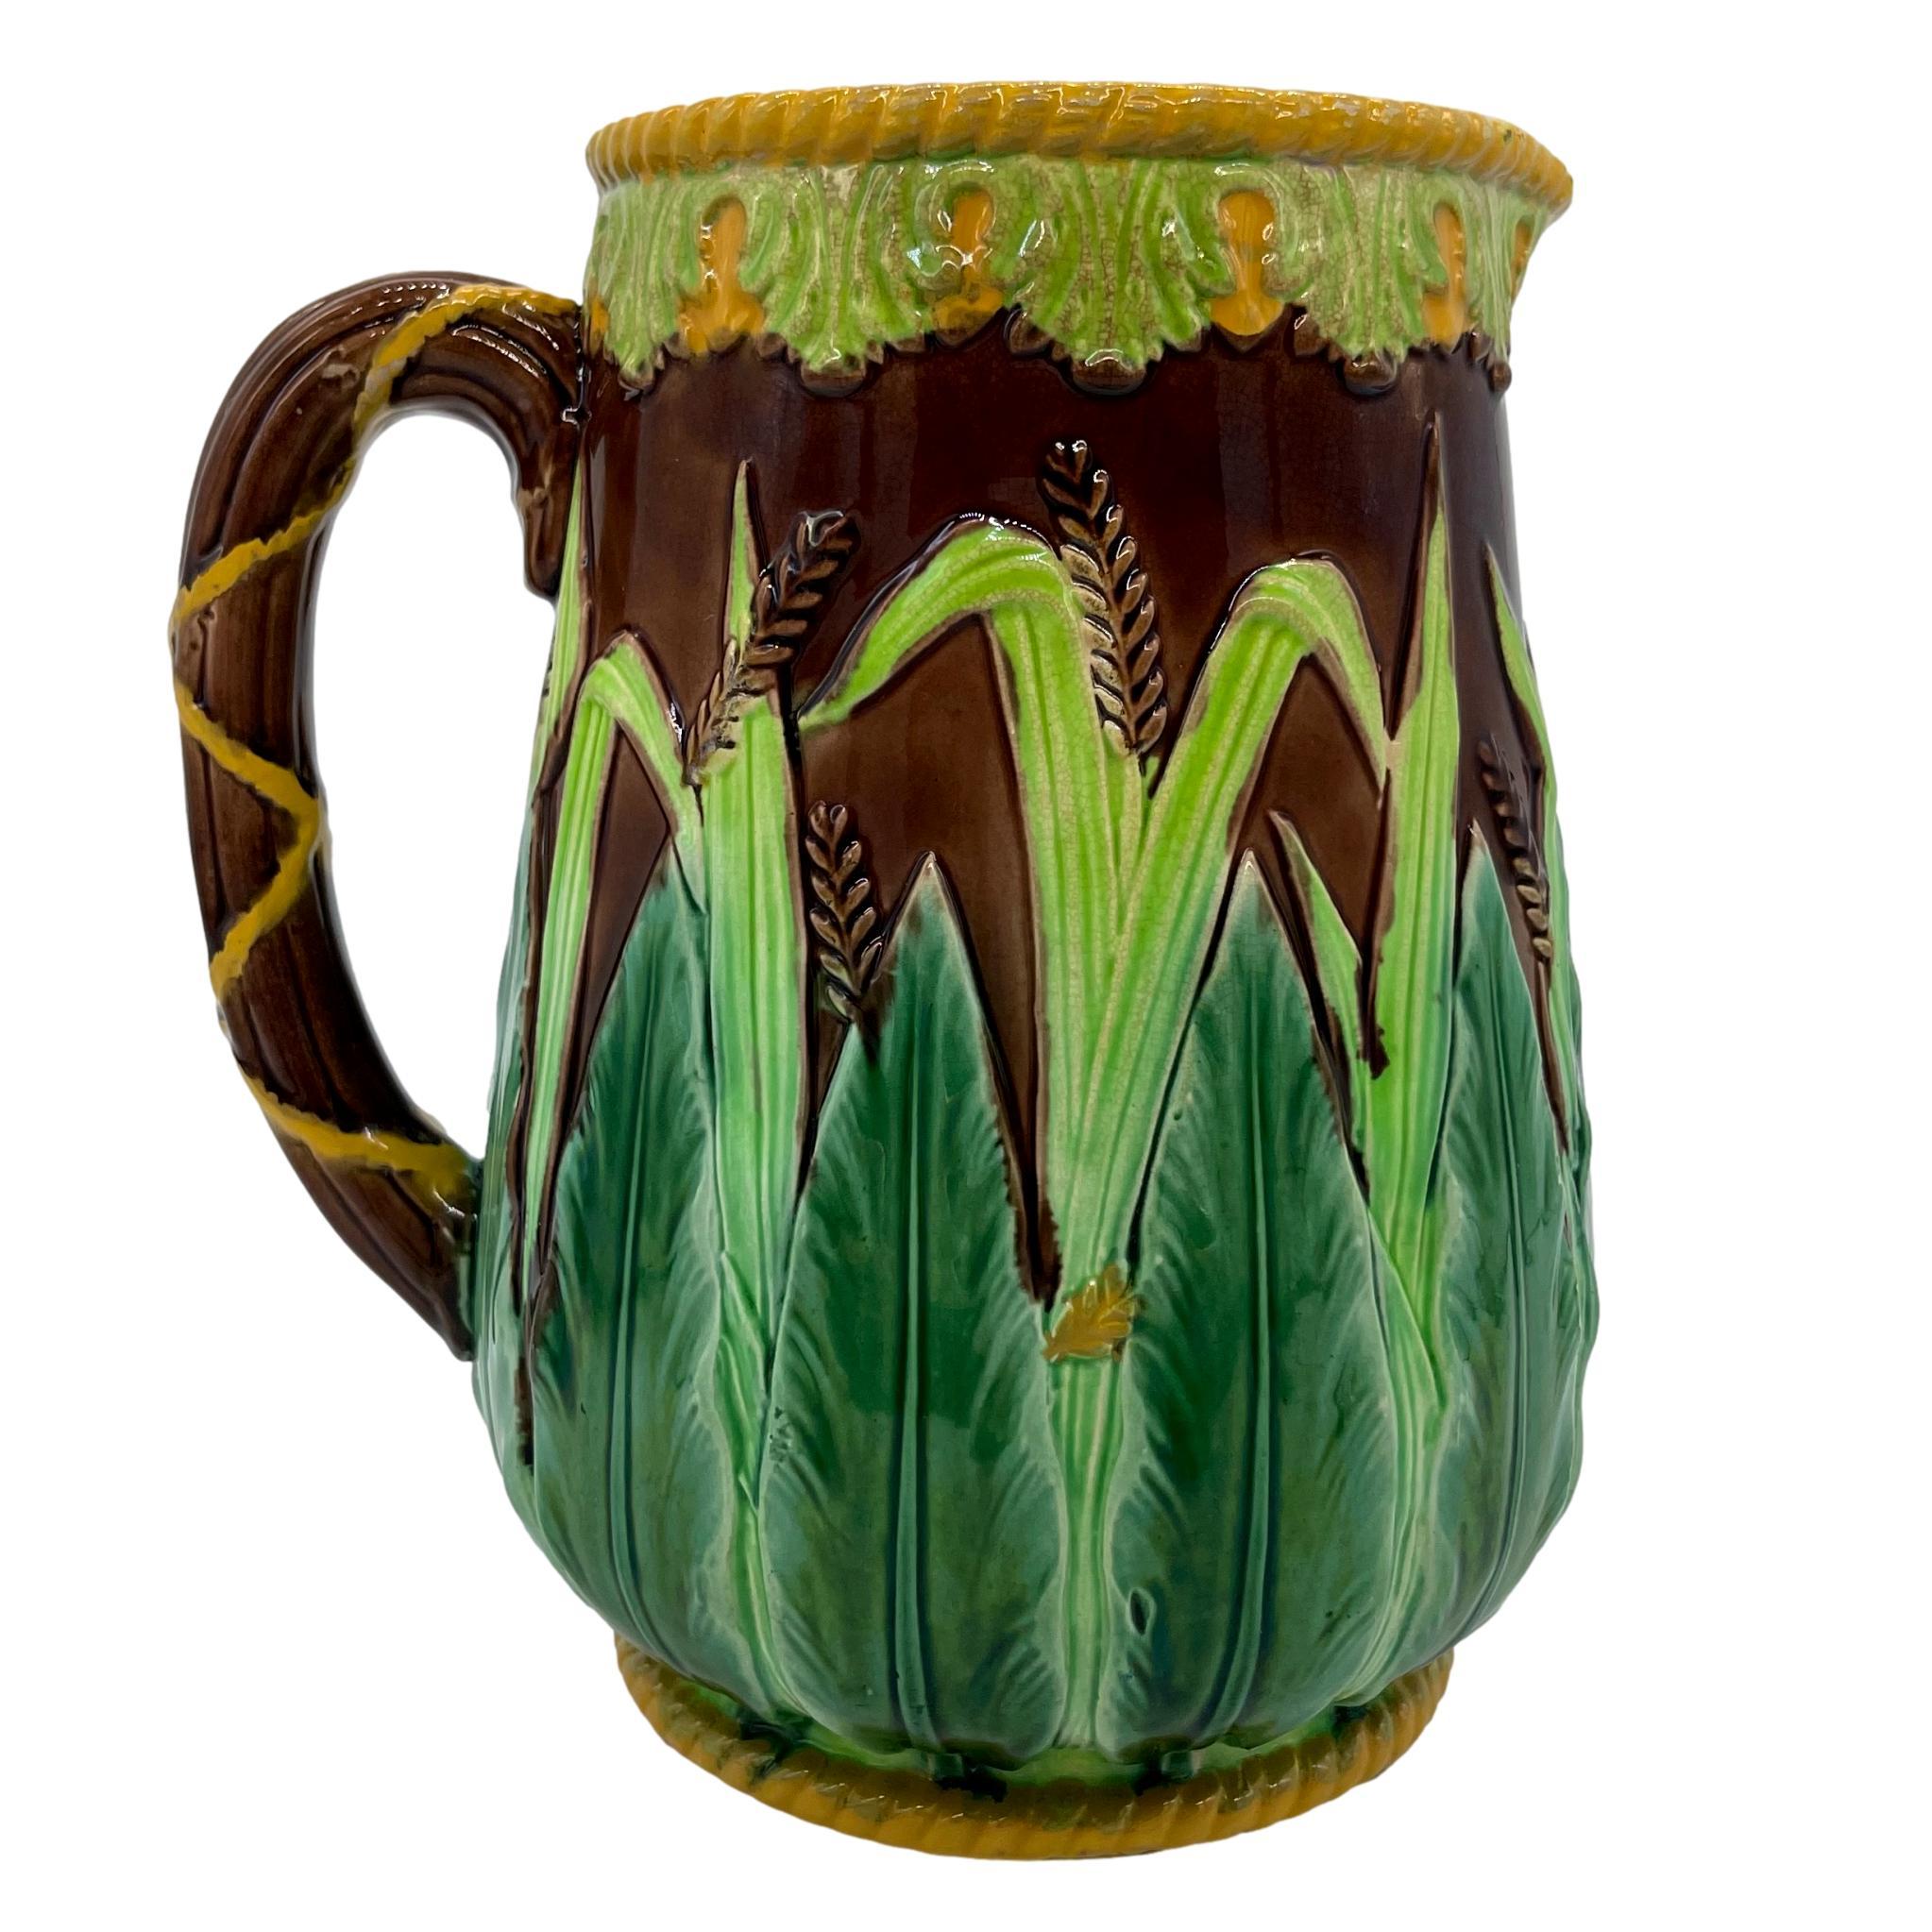 English Large George Jones Majolica Wheat Pitcher with Green Acanthus Leaves, ca. 1875